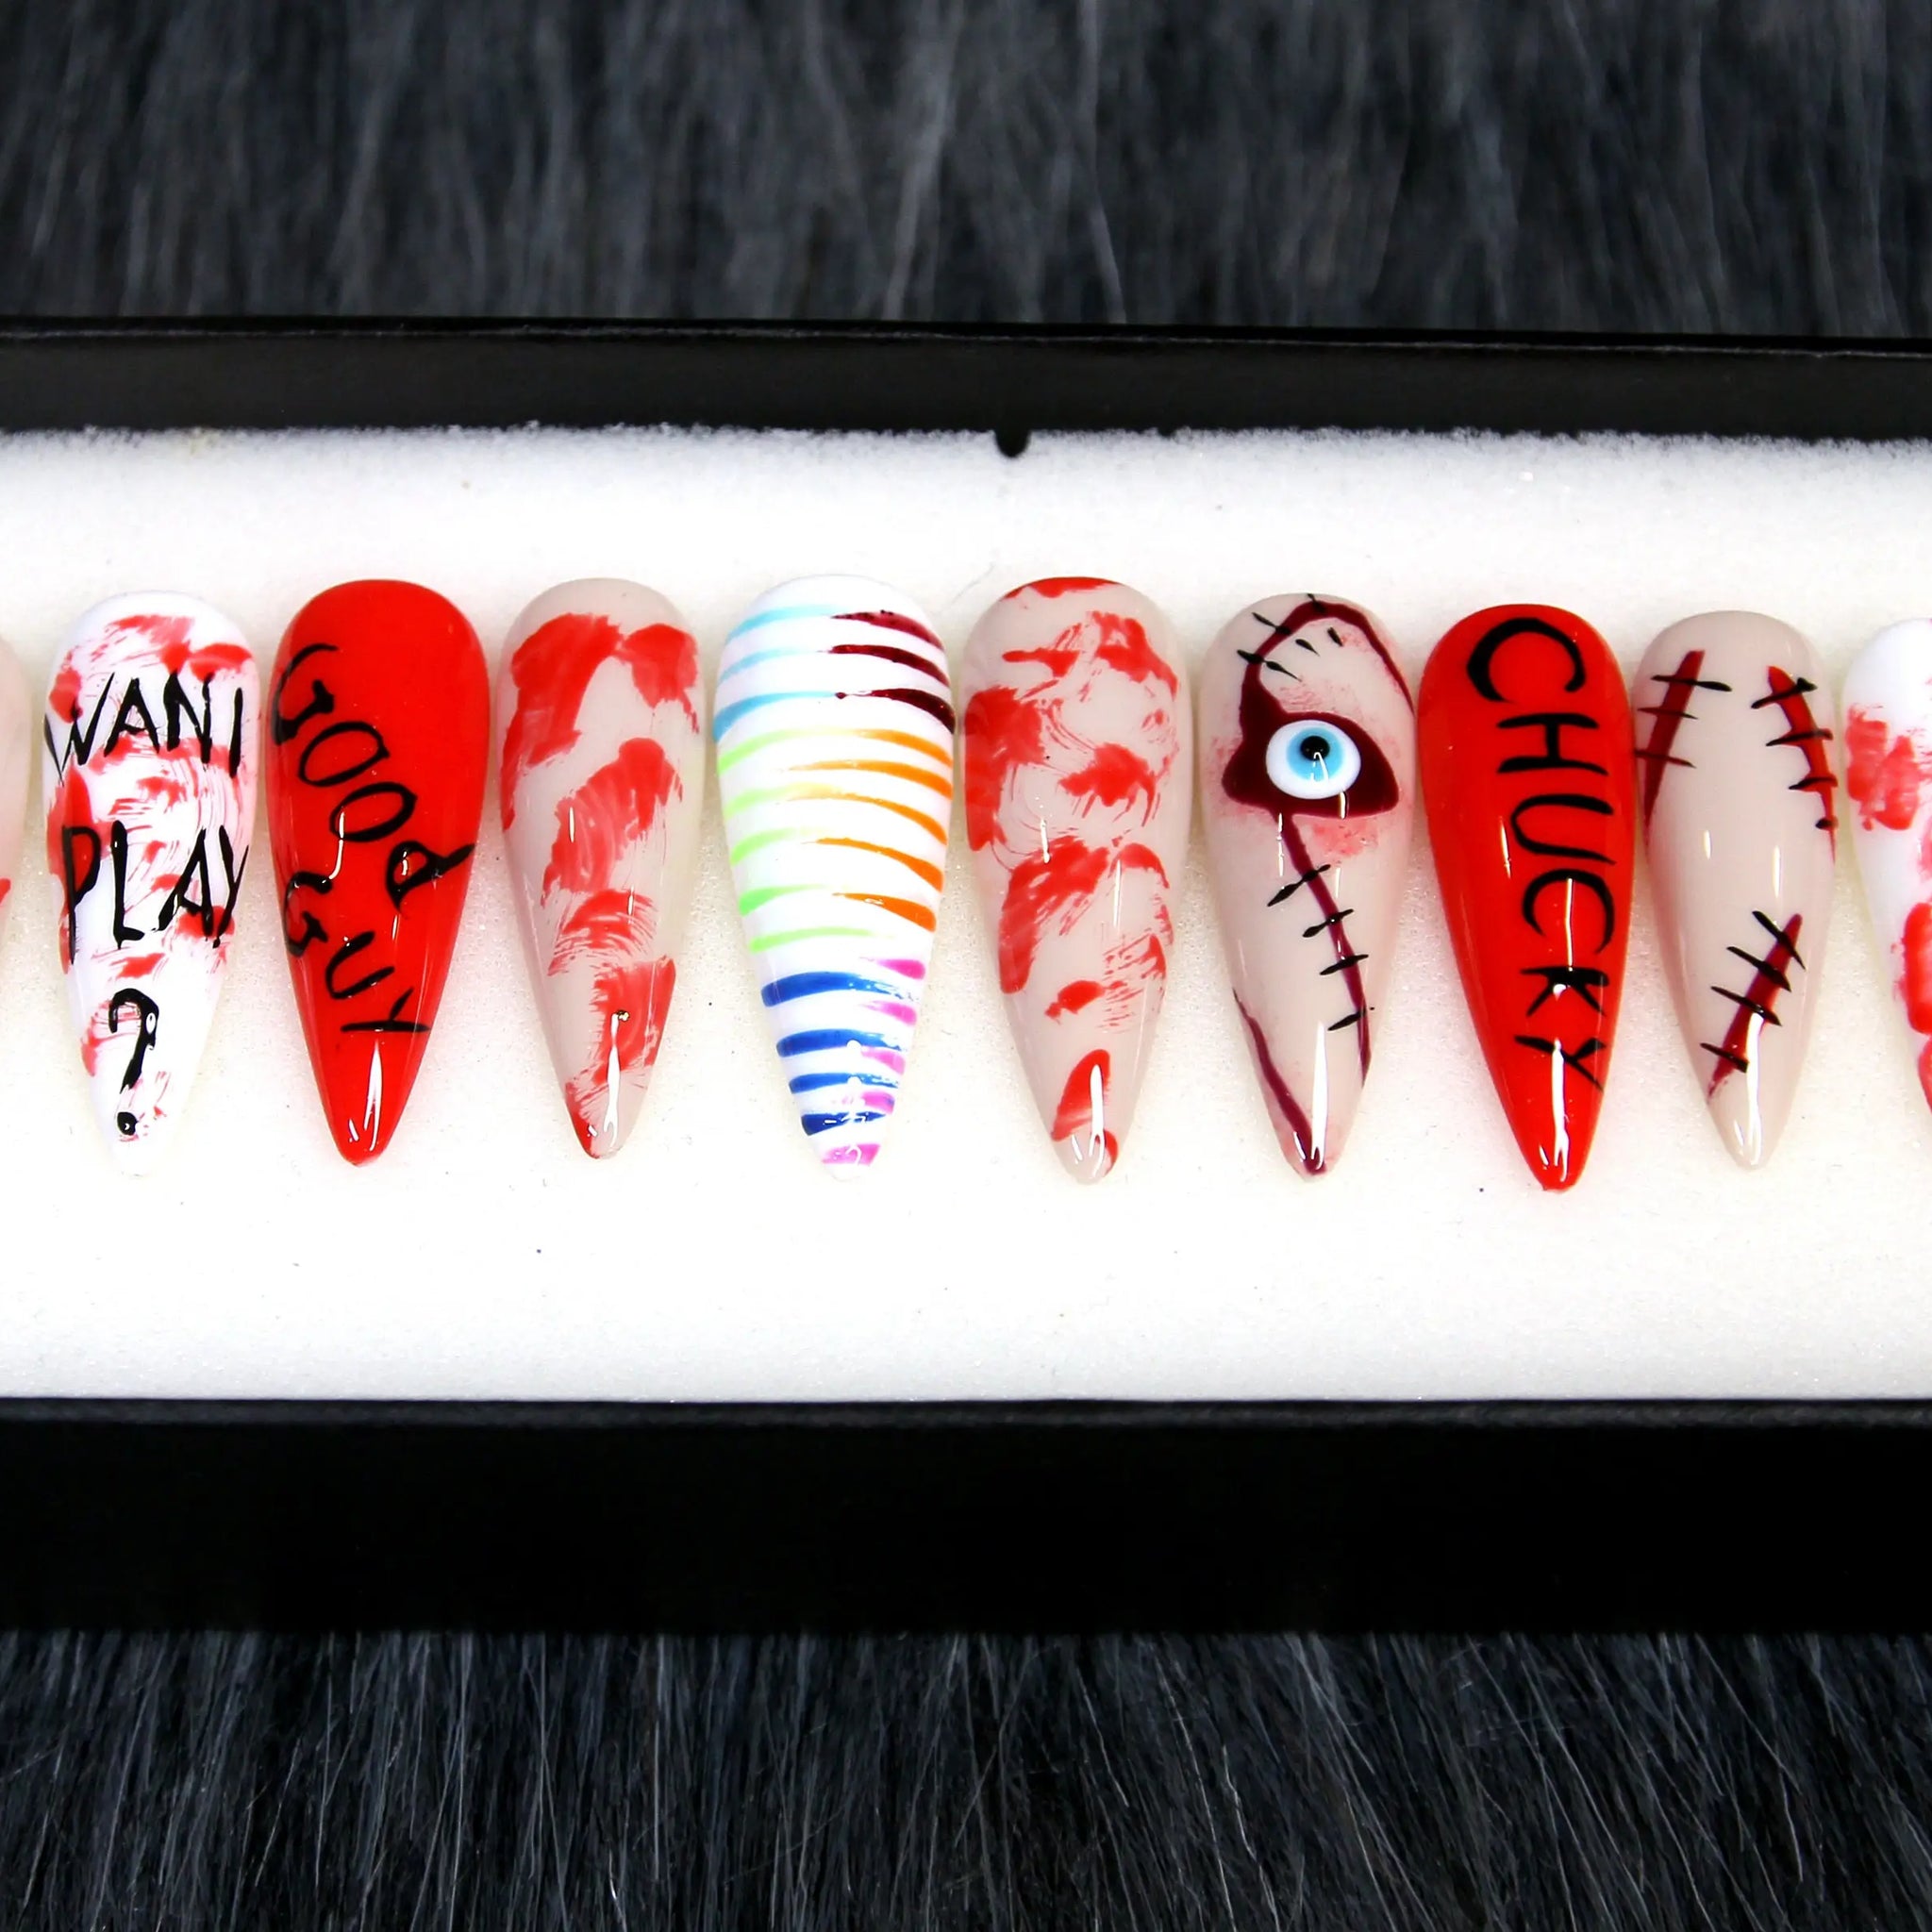 Halloween Bloody "Want Play?" Press on Nails - Spooky Red Classy Fingernails